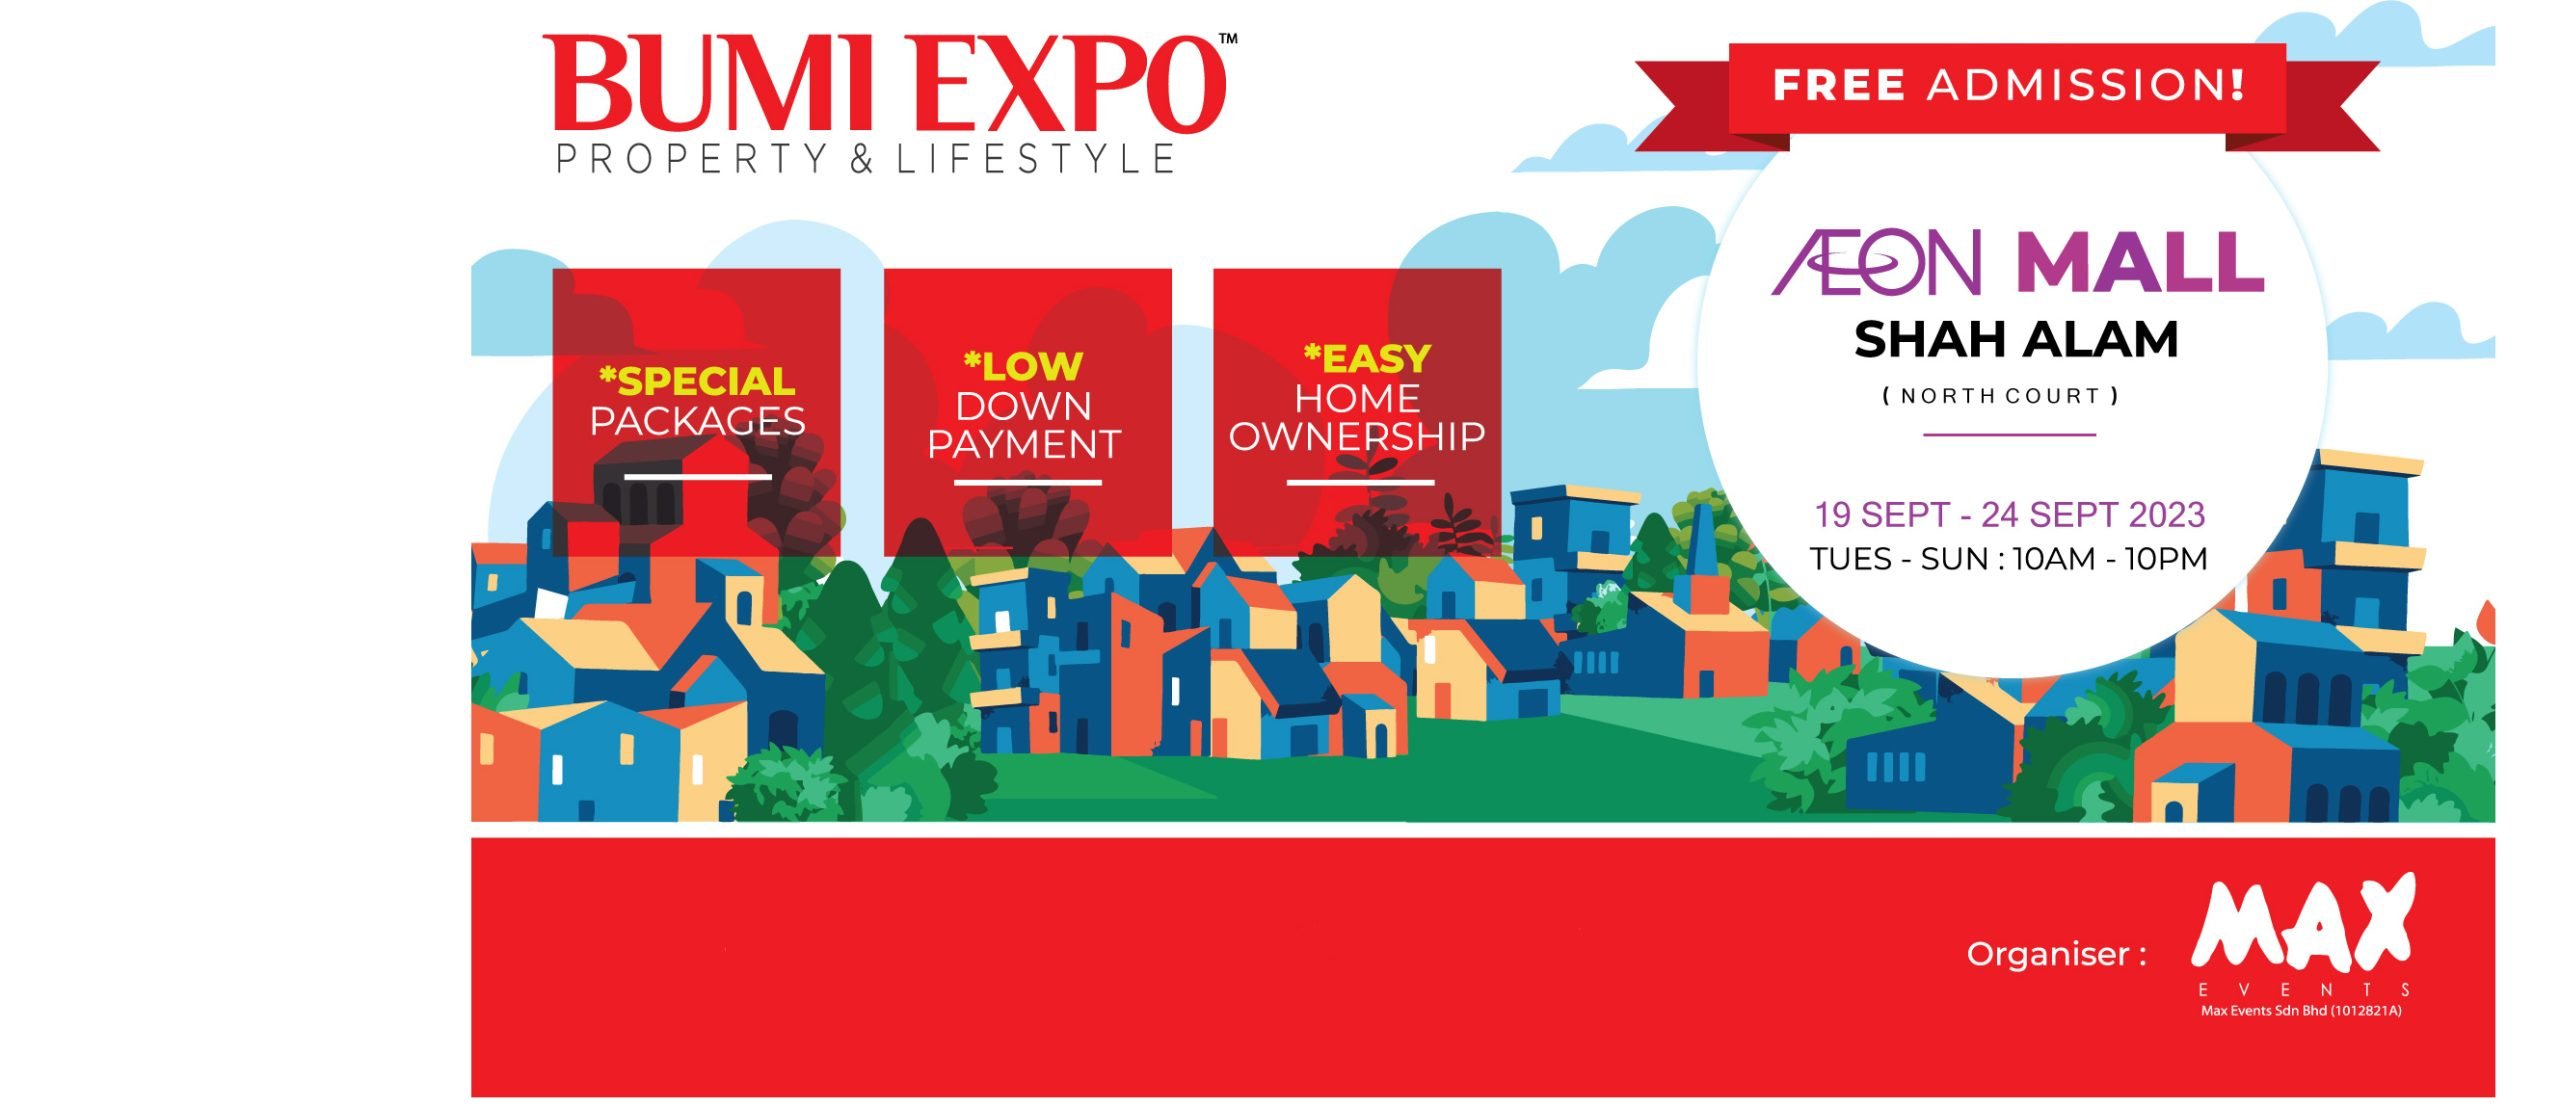 BUMI-EXPO_Banner-Artworks_18-24-Sept-2023